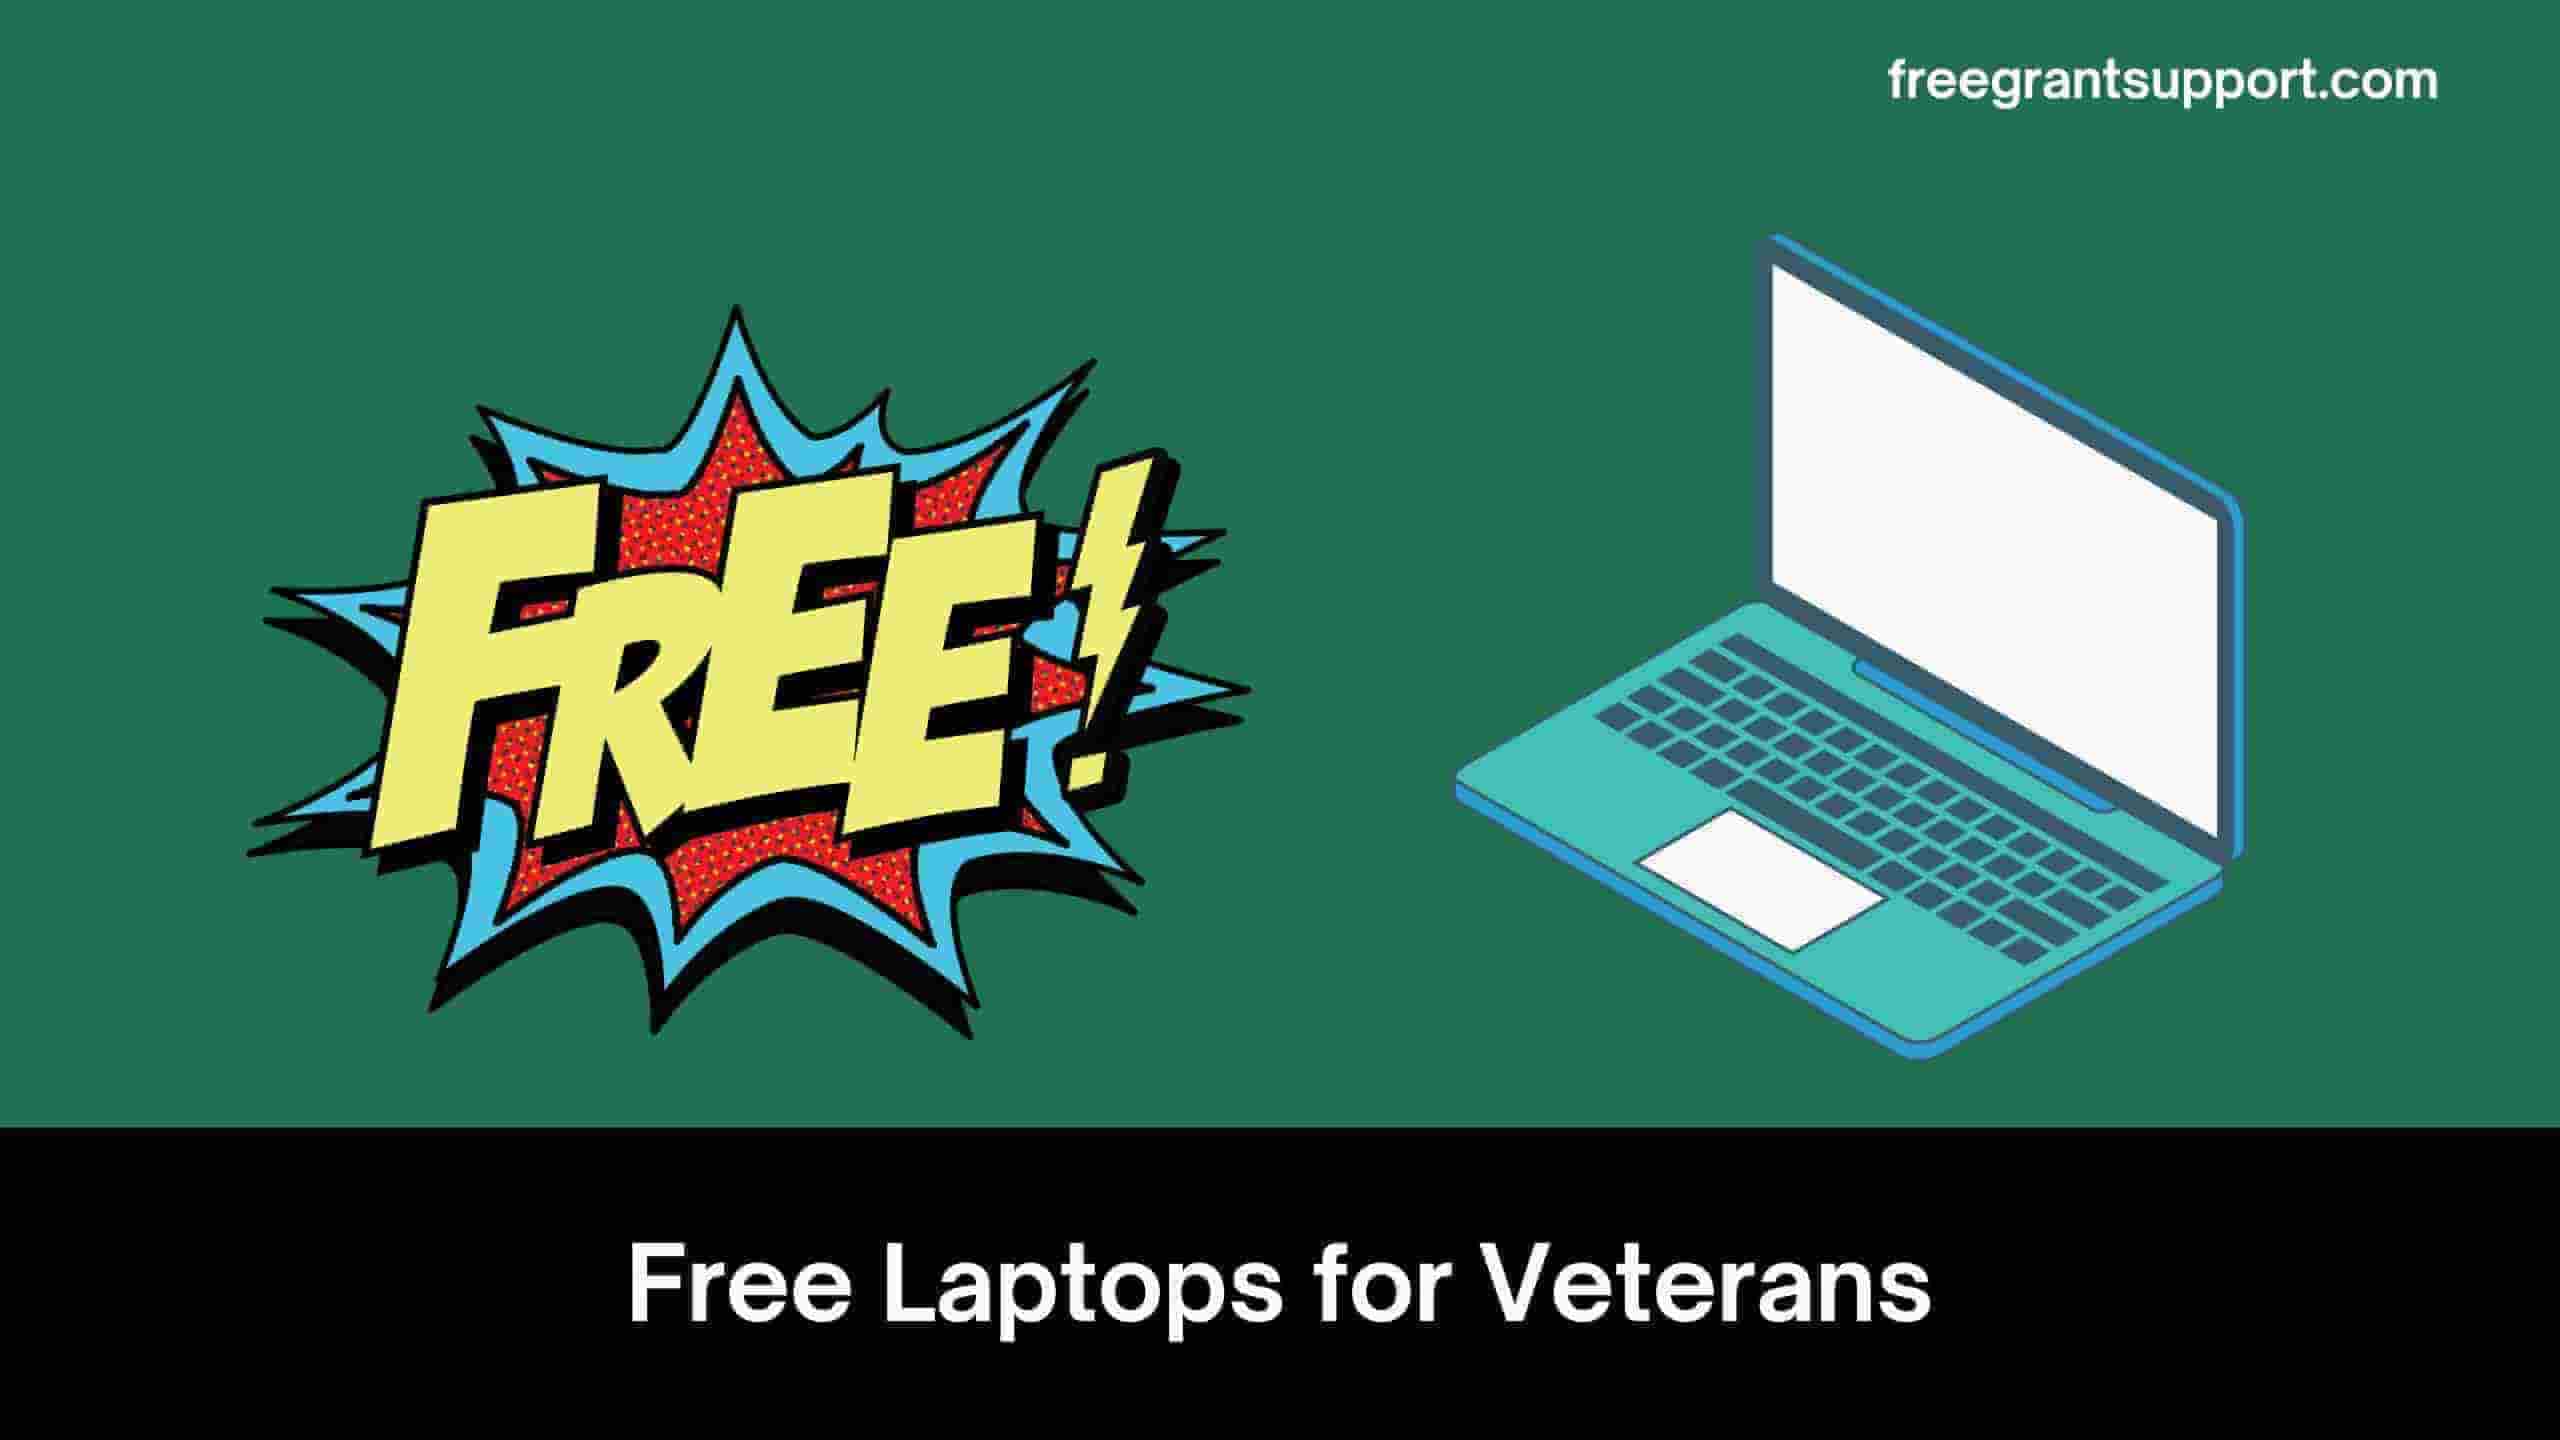 How to Get Free Laptops for Veterans? - Freegrantsupport